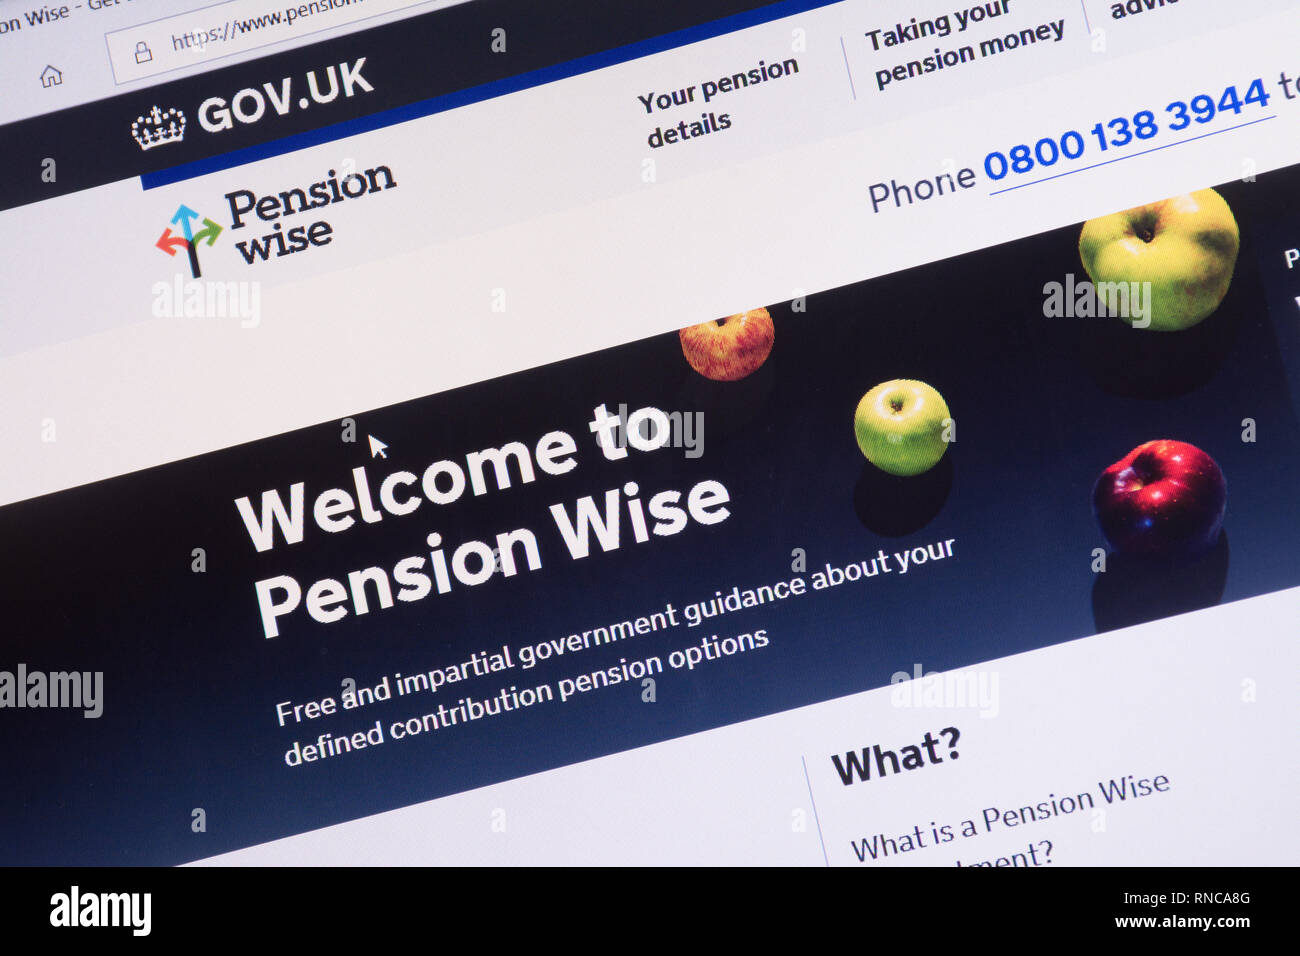 Pension Wise information on gov.uk website - screenshot on lapop computer. State pensions advice on the internet. Stock Photo